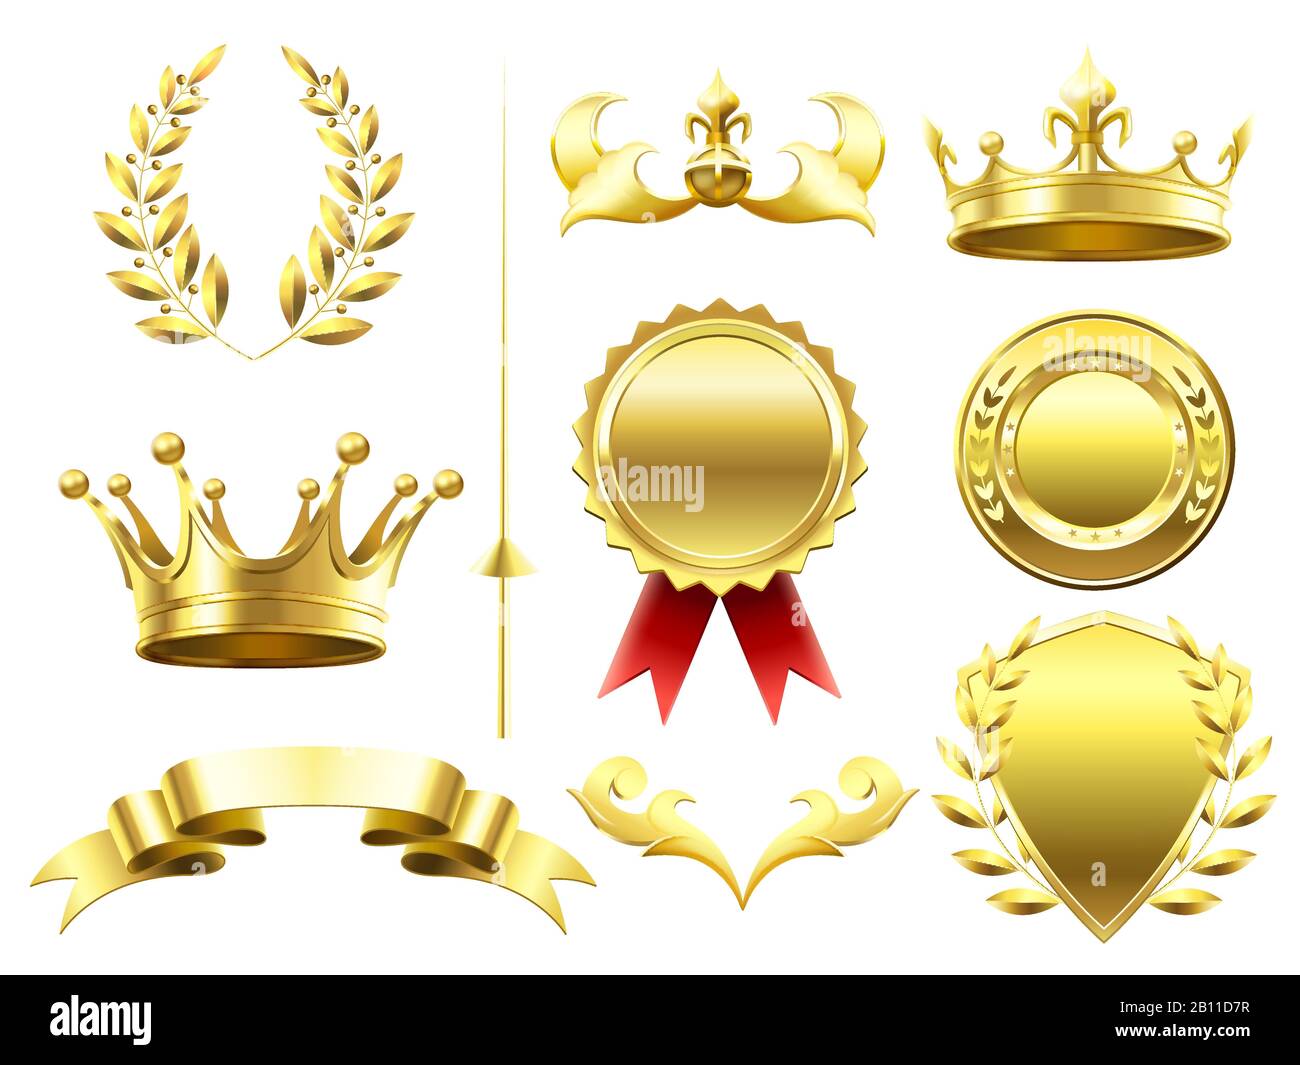 Heraldic 3D elements. Royal crowns and shields. Sport challenge winner gold medal. Laurel wreath and golden crown isolated vector set Stock Vector